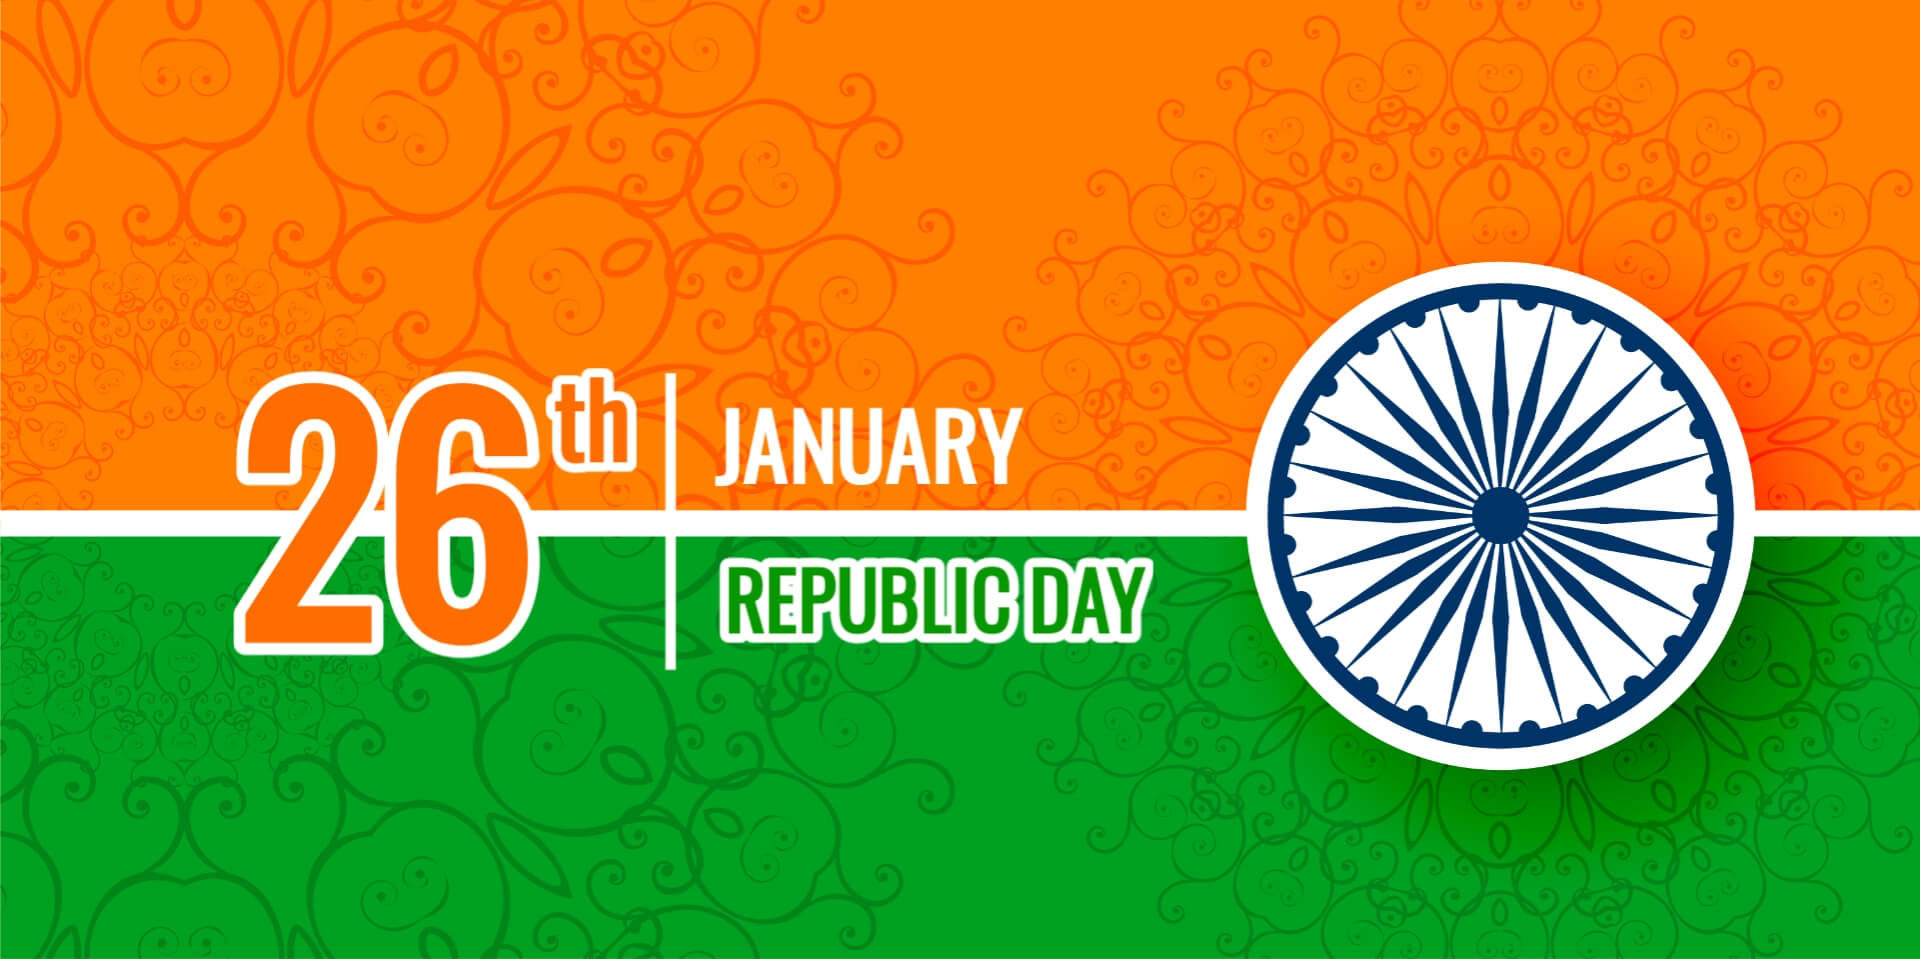 Happy Republic Day 2022 Images